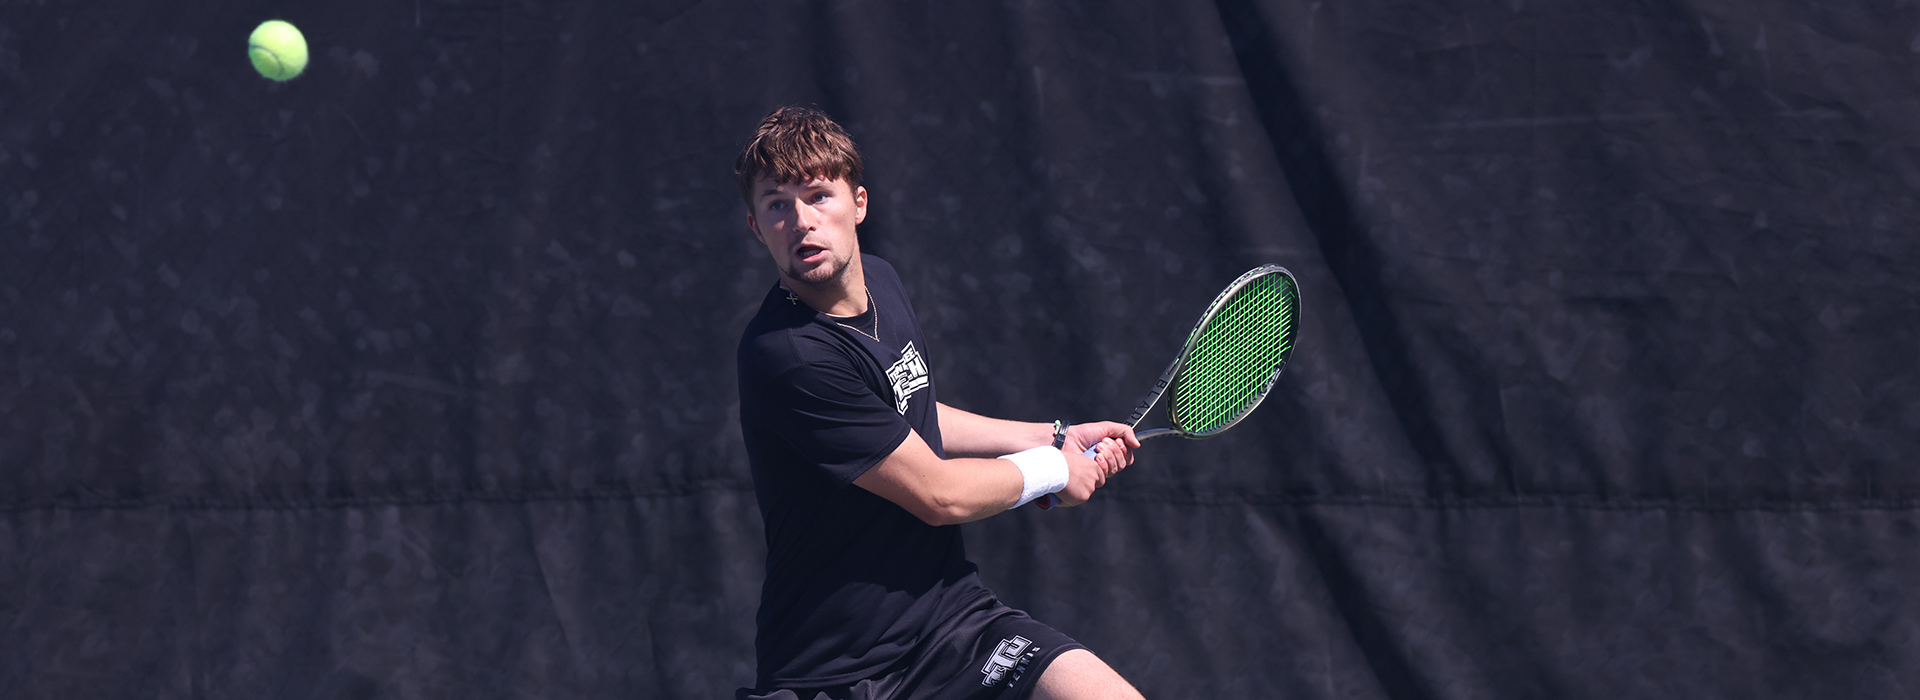 Tech tennis moves to 3-0 in Horizon League play behind 4-0 victory over EIU